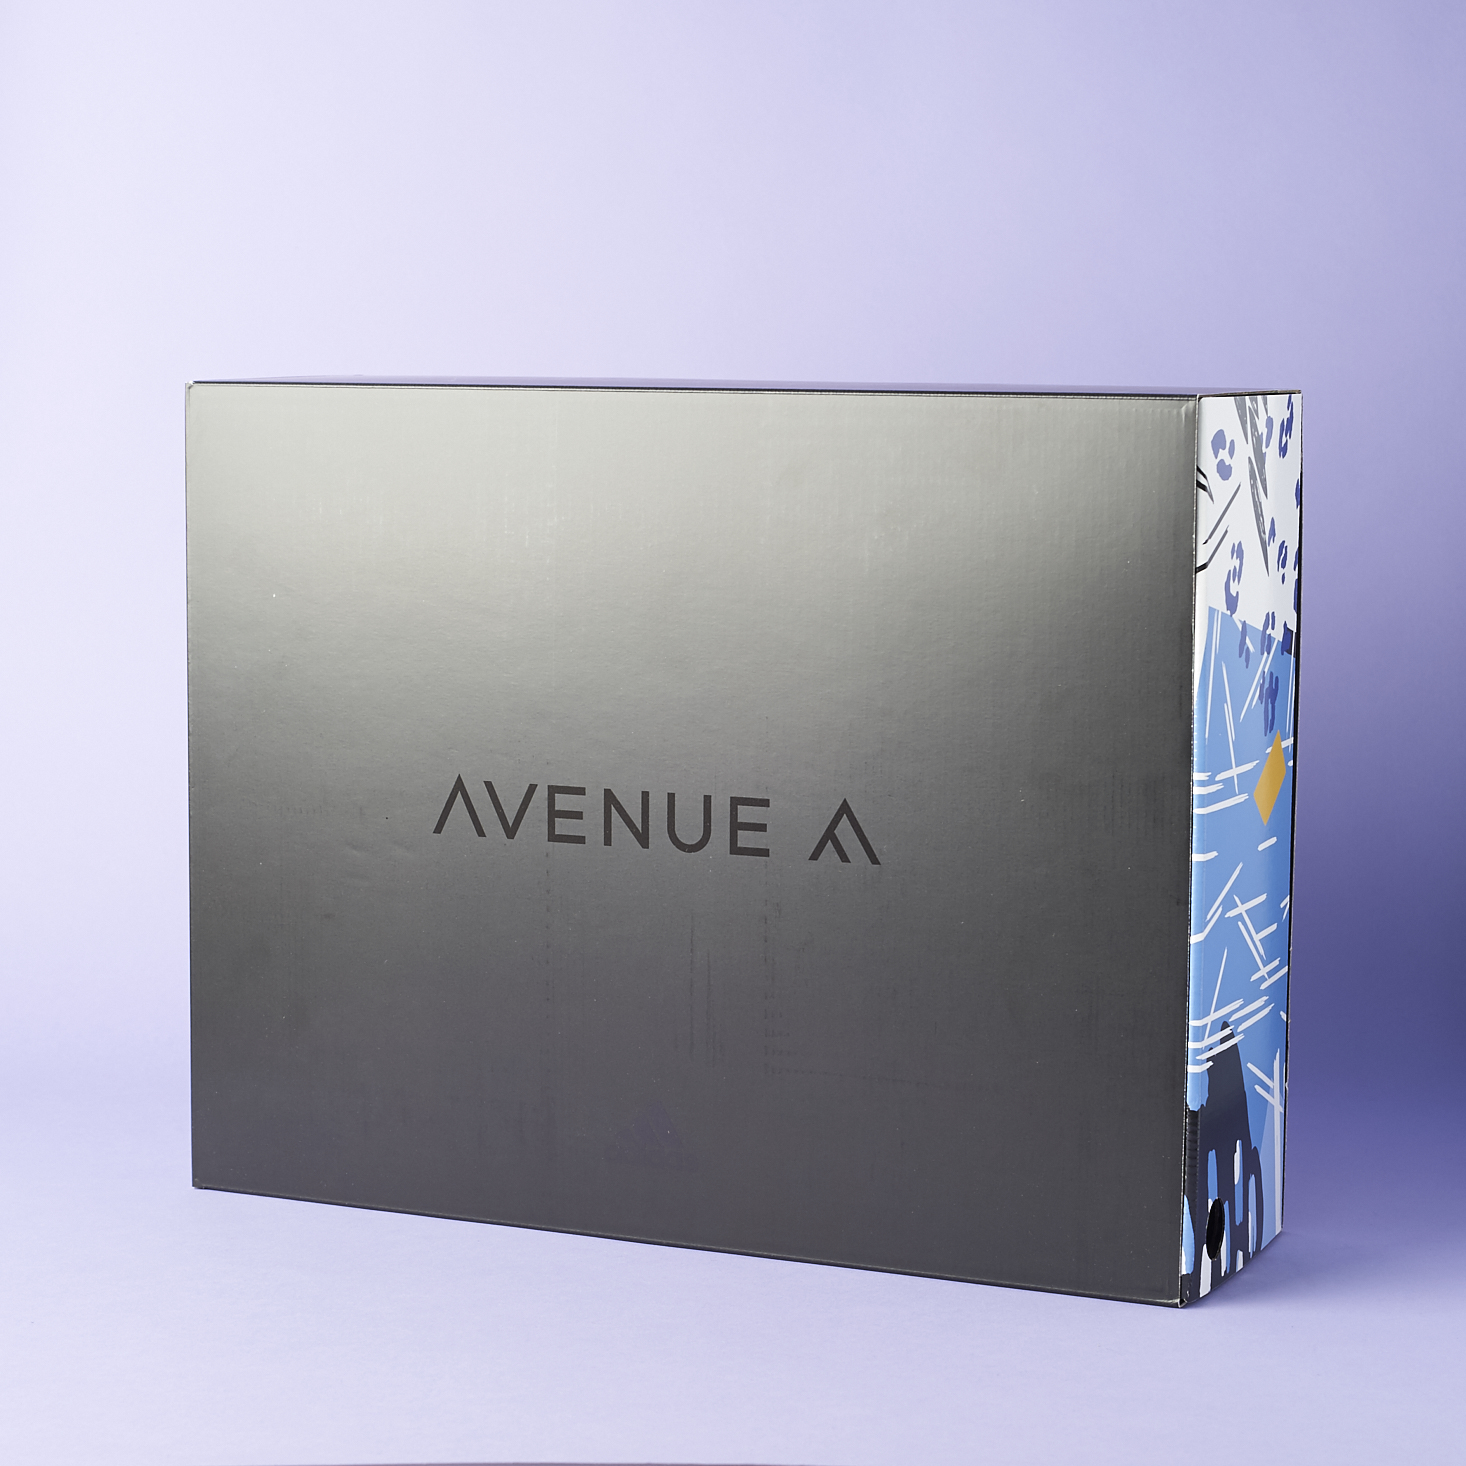 Avenue A by Adidas Subscription Box Review – Spring 2017